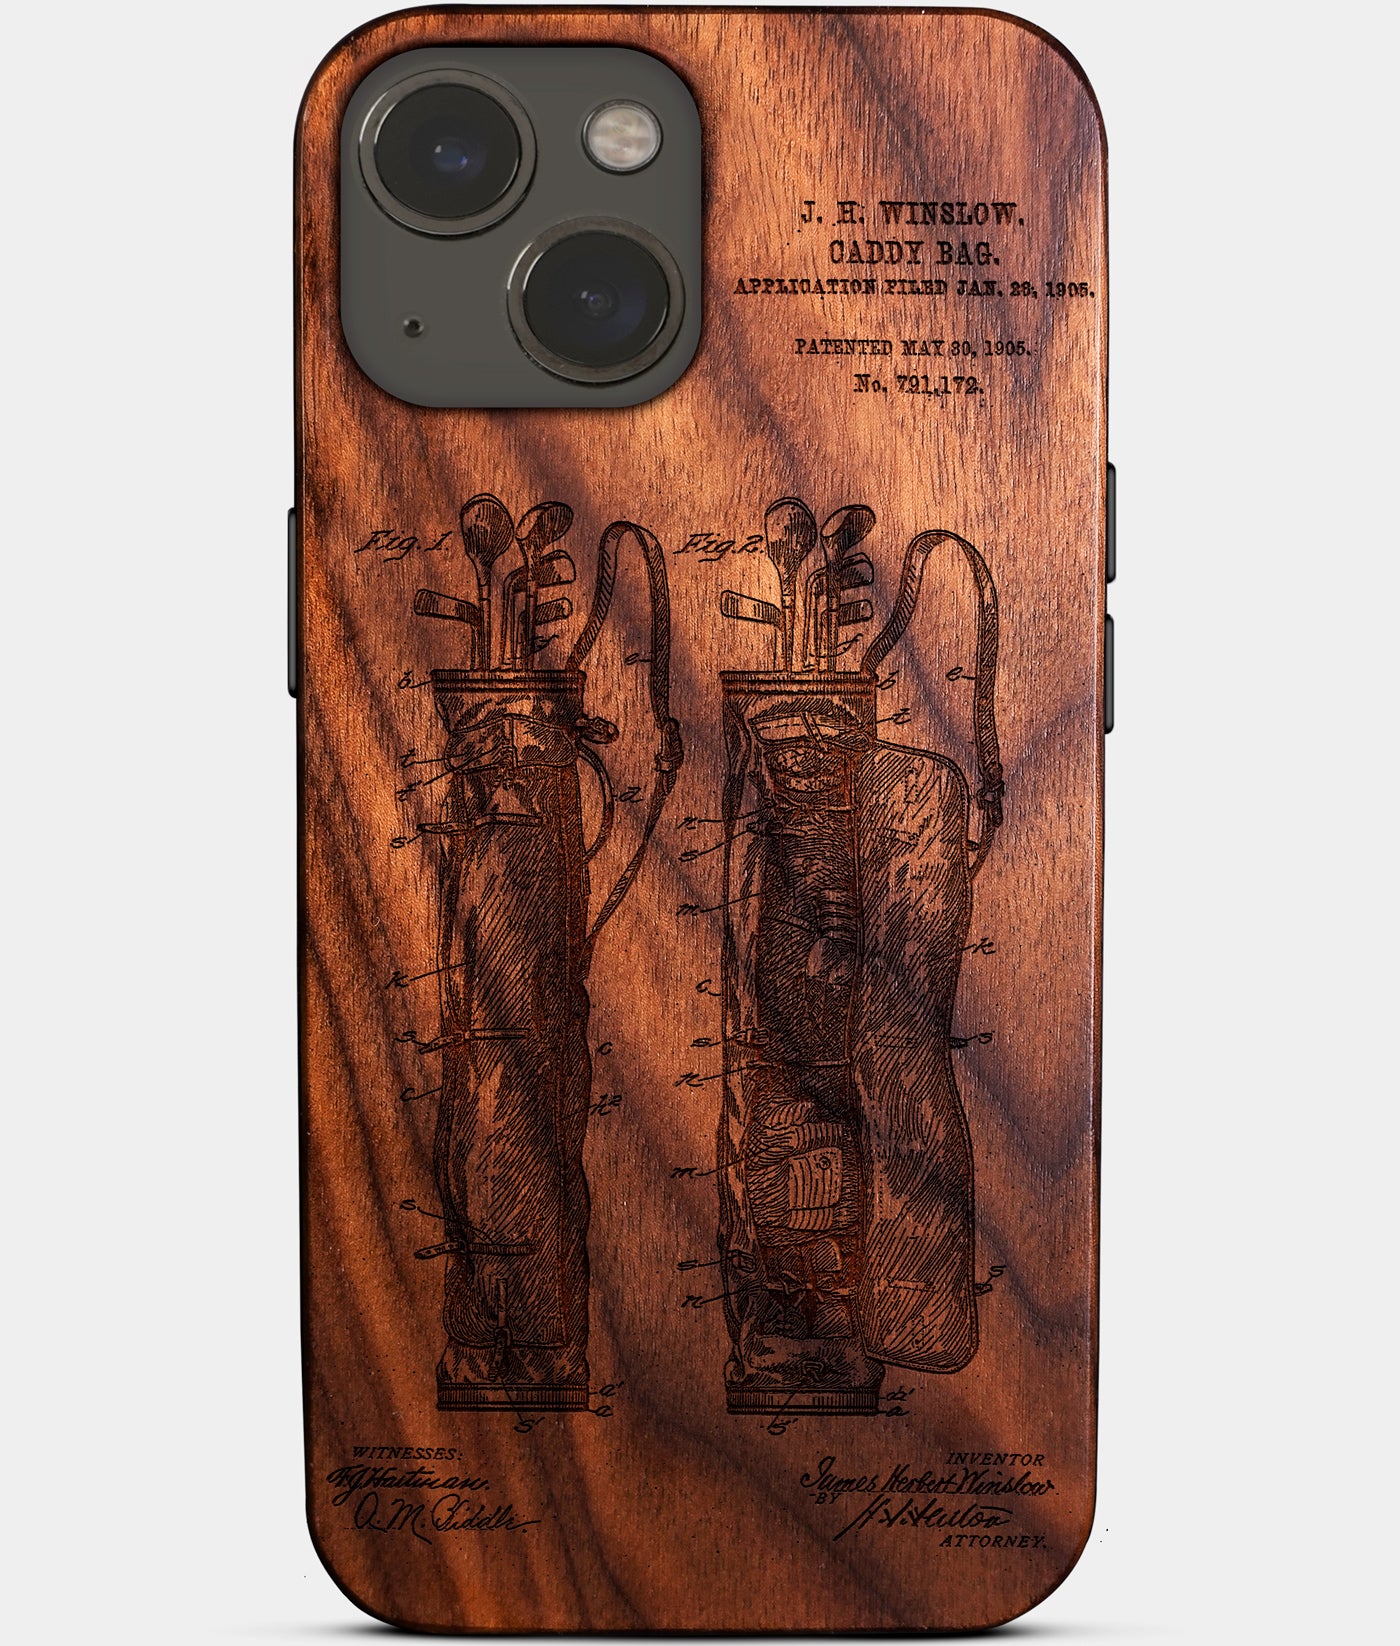 Custom Golf iPhone 14 Cases Golf Bag Personalized Golf Gifts For Men 2022 Best Golf Christmas Gifts Best Country Club Gifts Carved Wood Unusual Golf Gift For Him Monogrammed iPhone 14 Covers